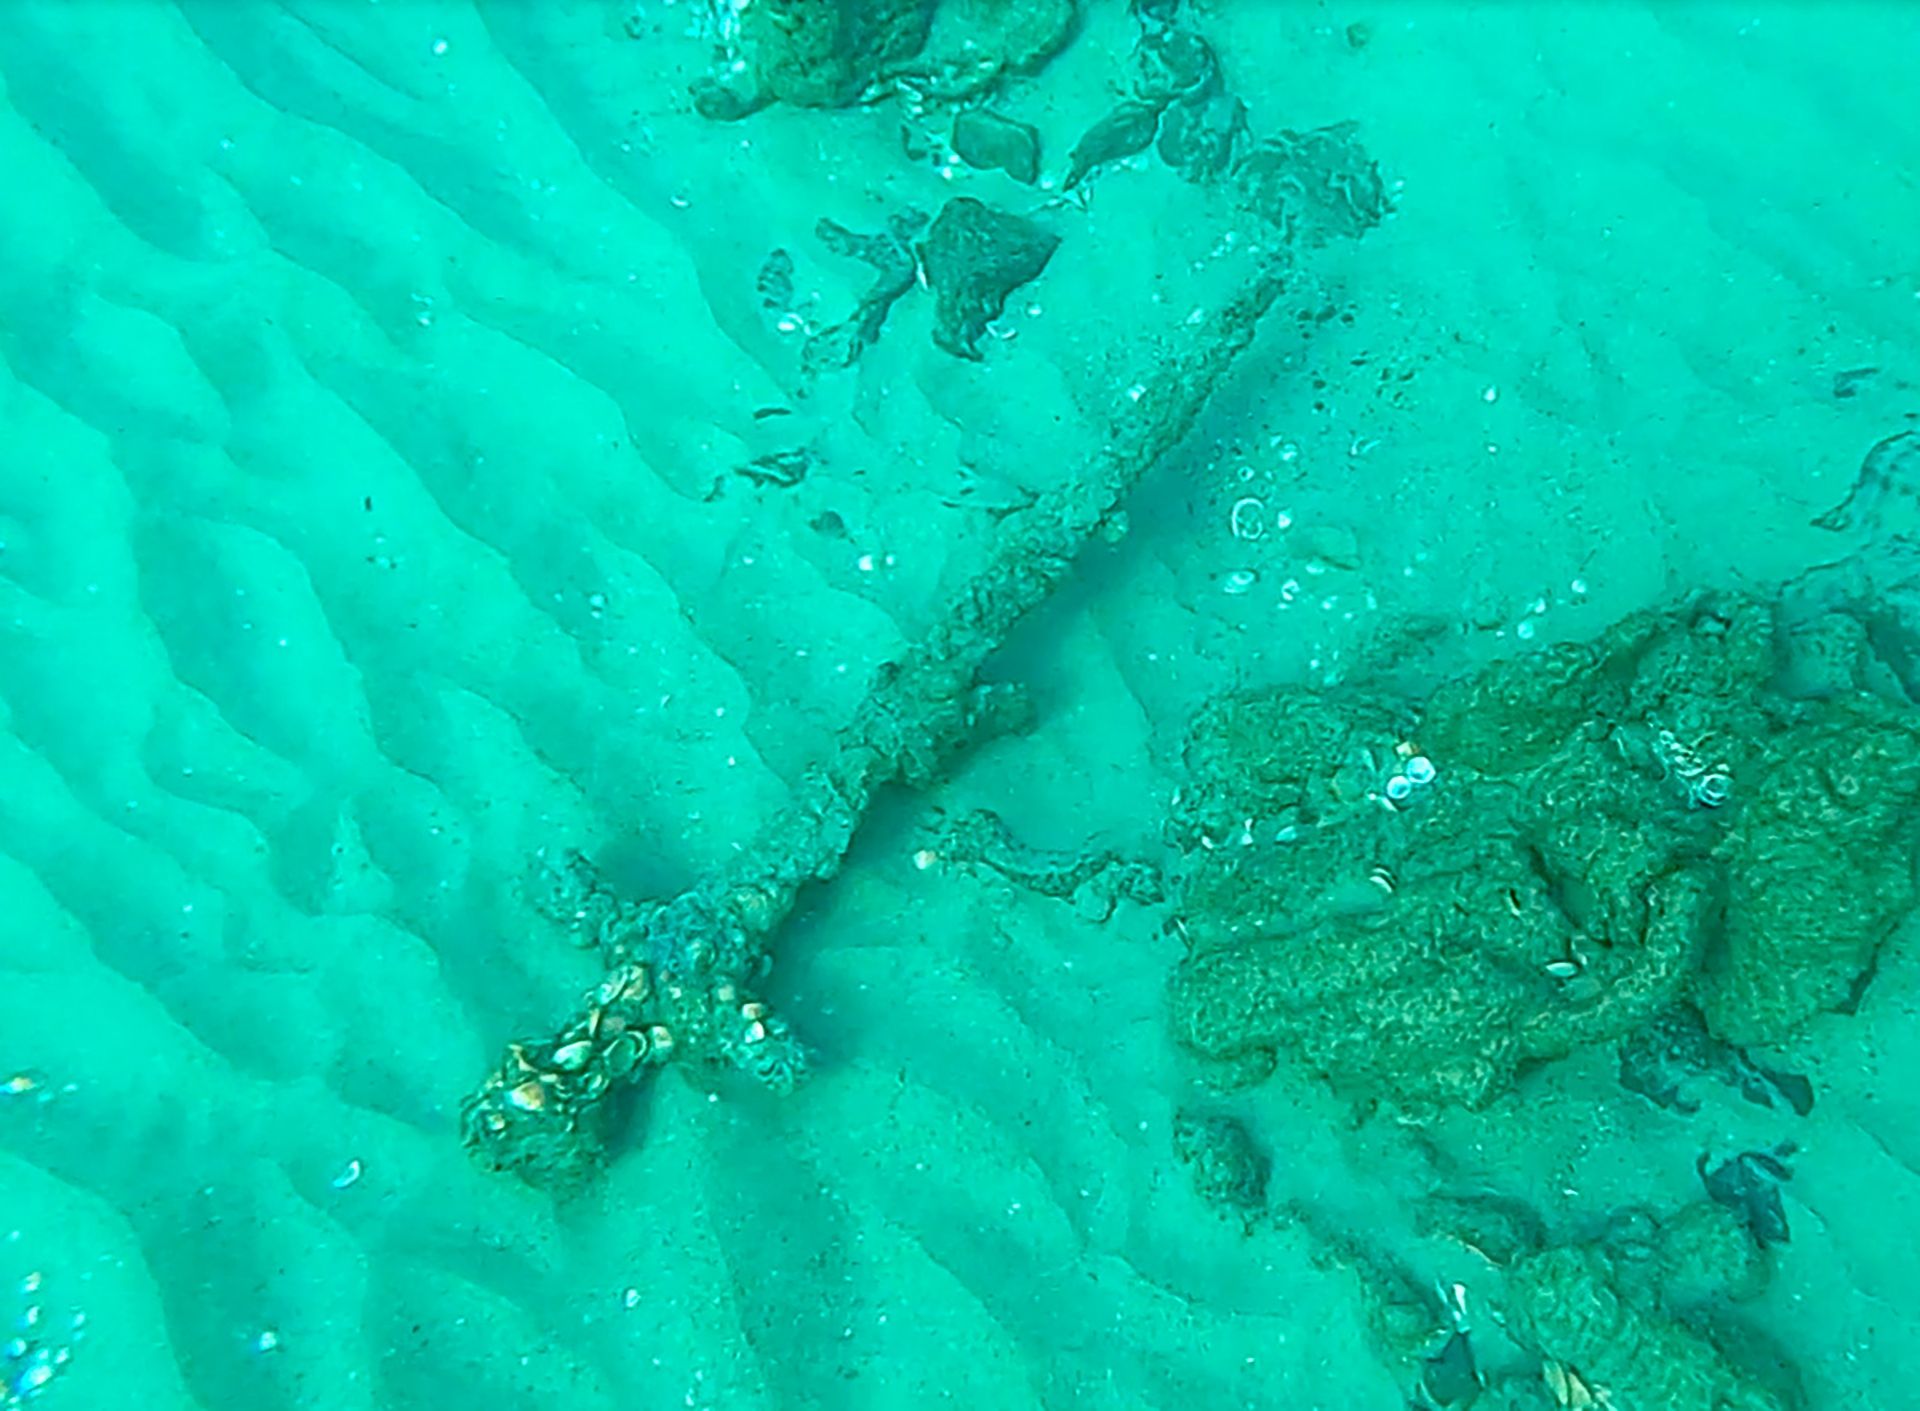 Medieval sword found on seabed was likely lost during naval battle 1